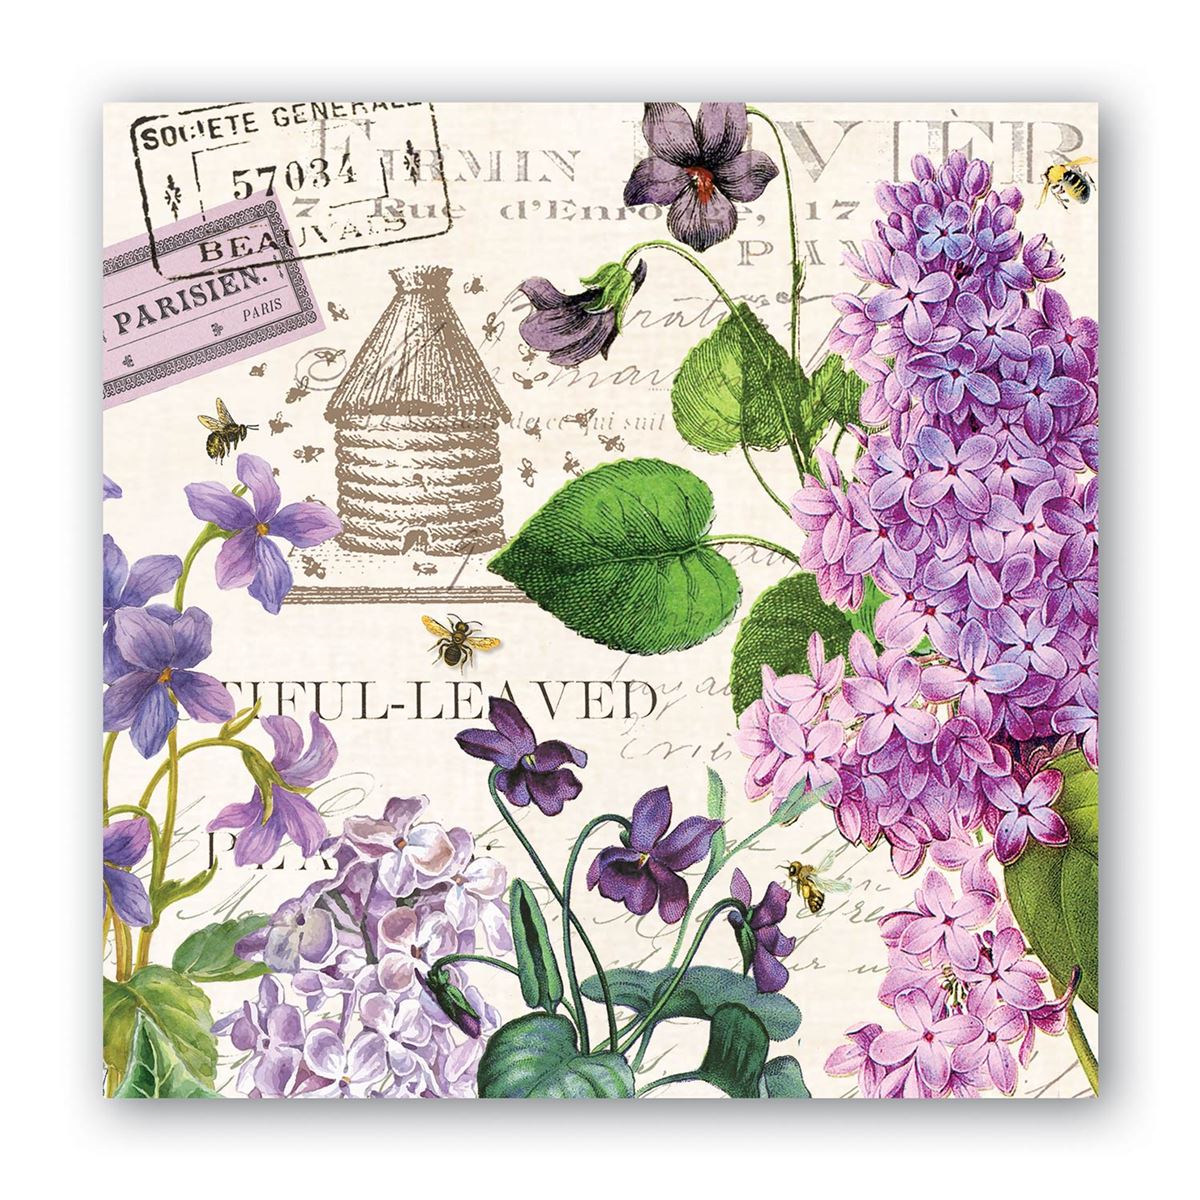 Lilac and Violets - Cocktail Napkins    